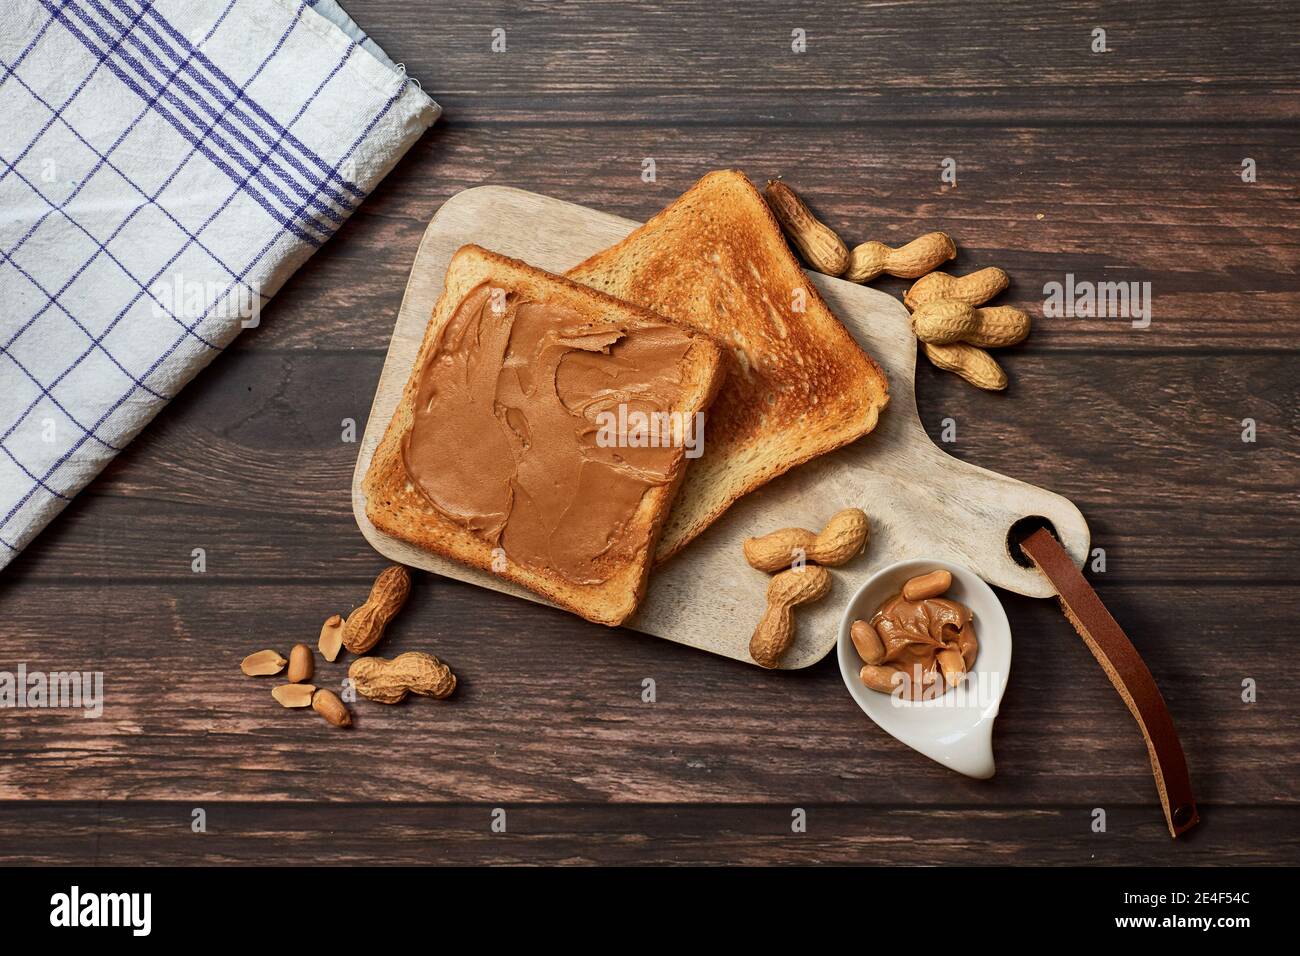 Sweet breakfast with peanut butter toast and peanuts on a wooden cutting board Stock Photo